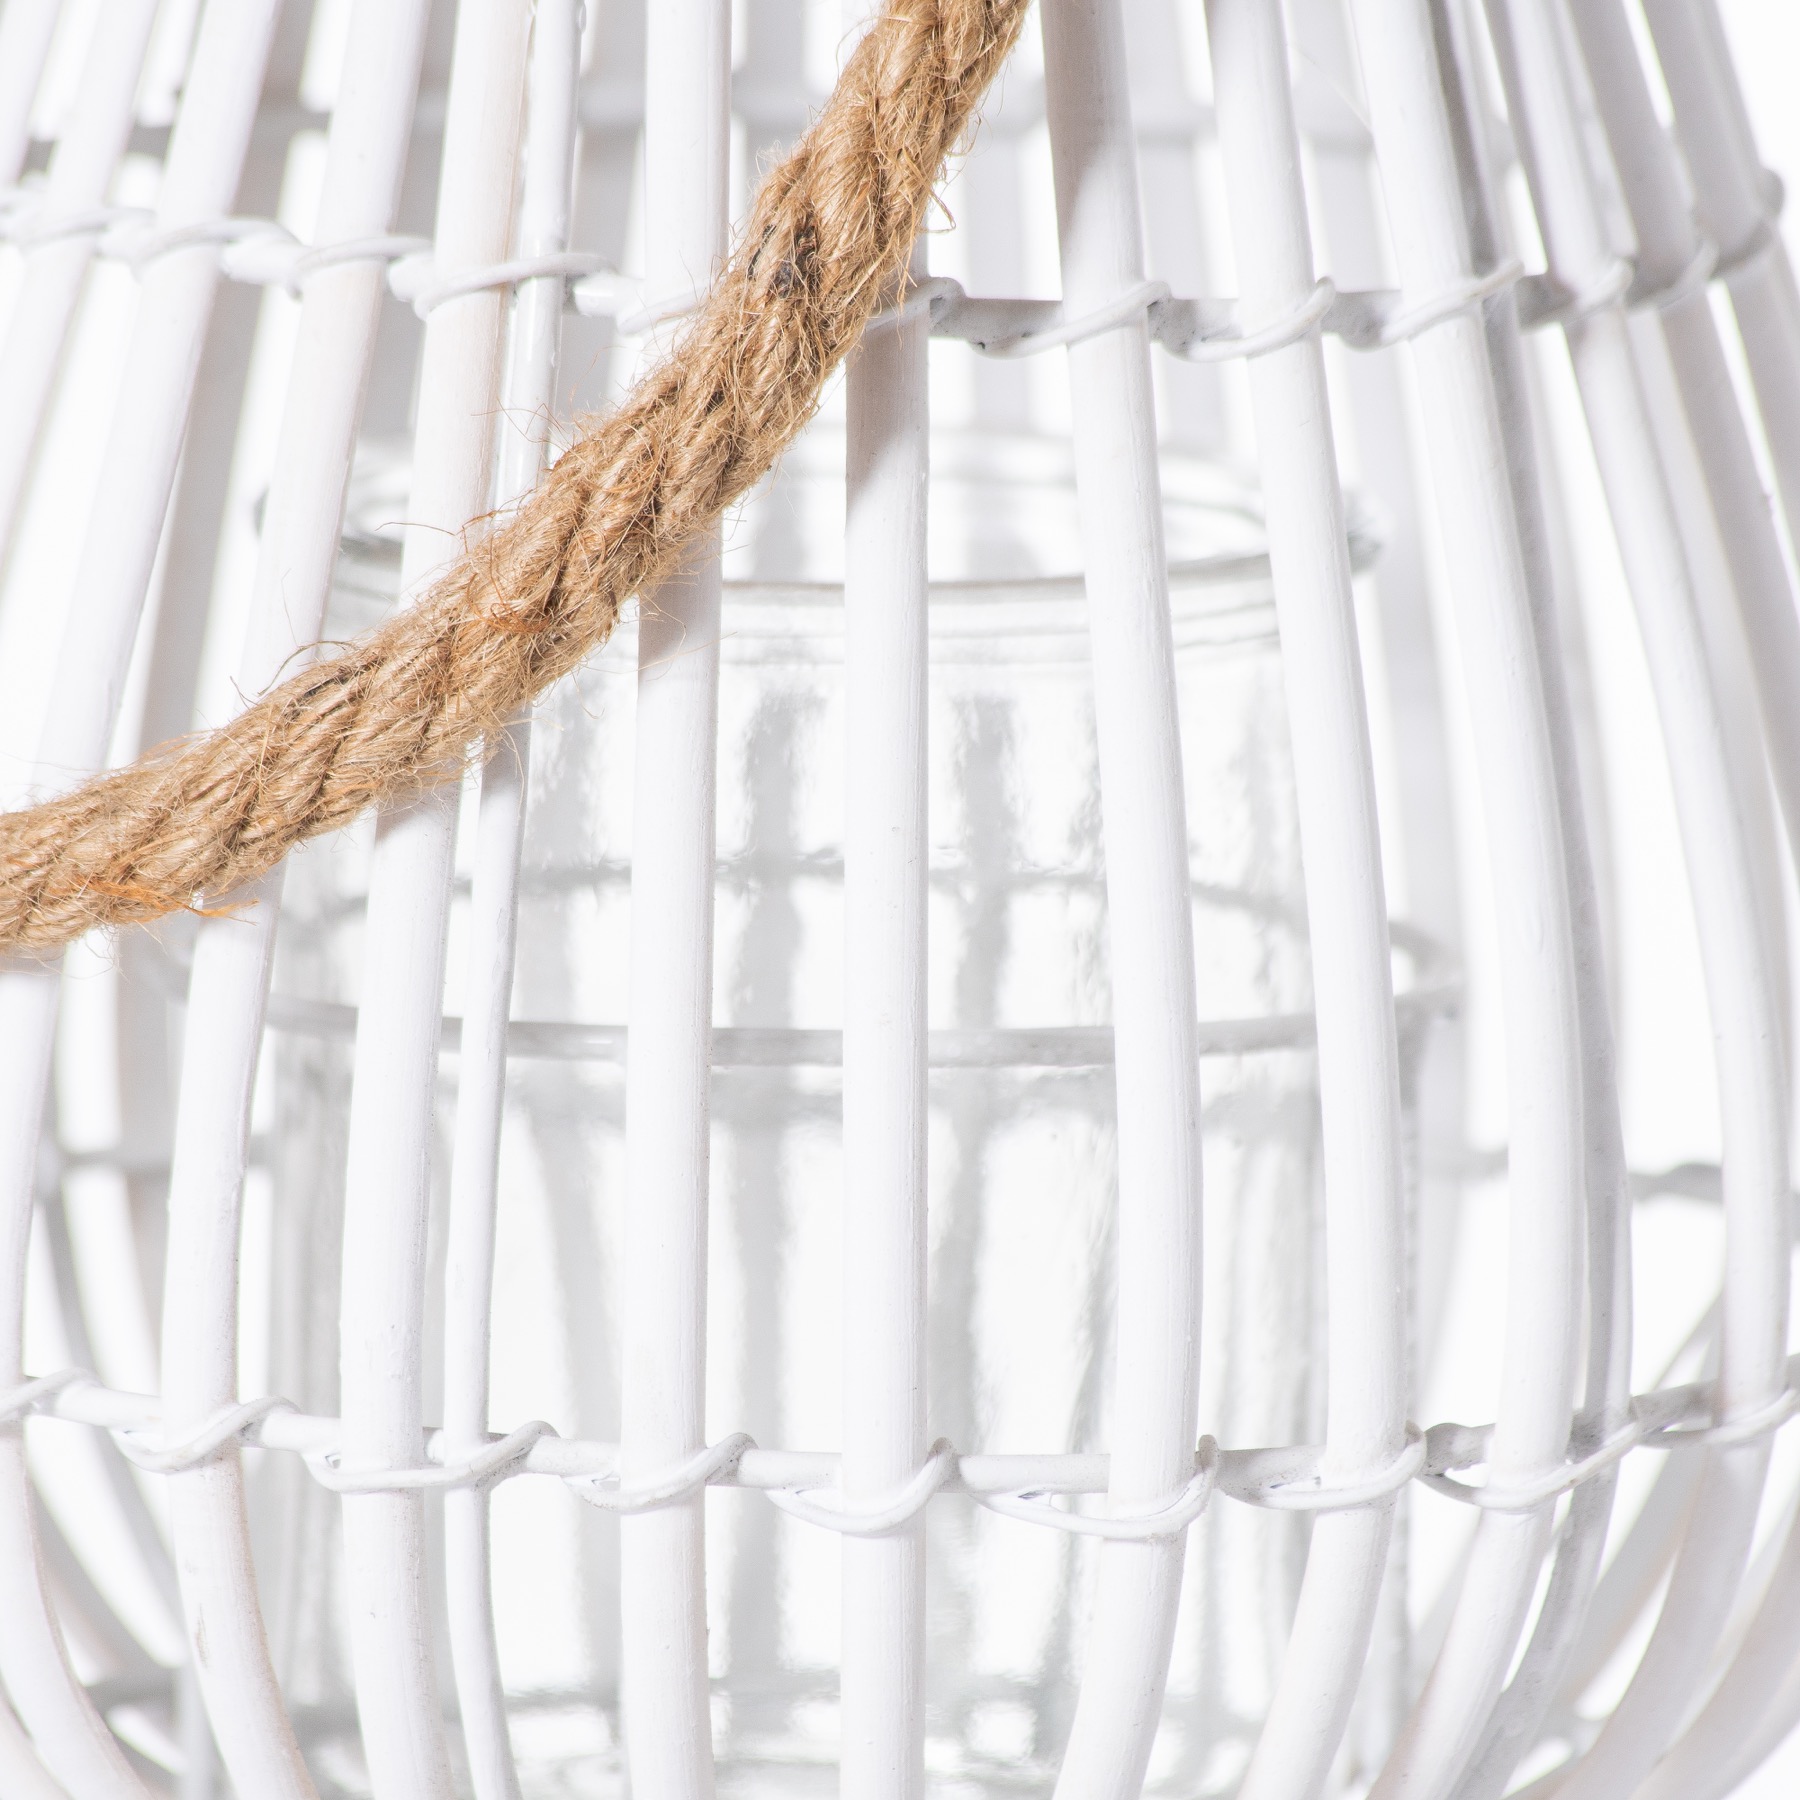 Small Domed White Rattan Lantern With Rope Detail - Image 2